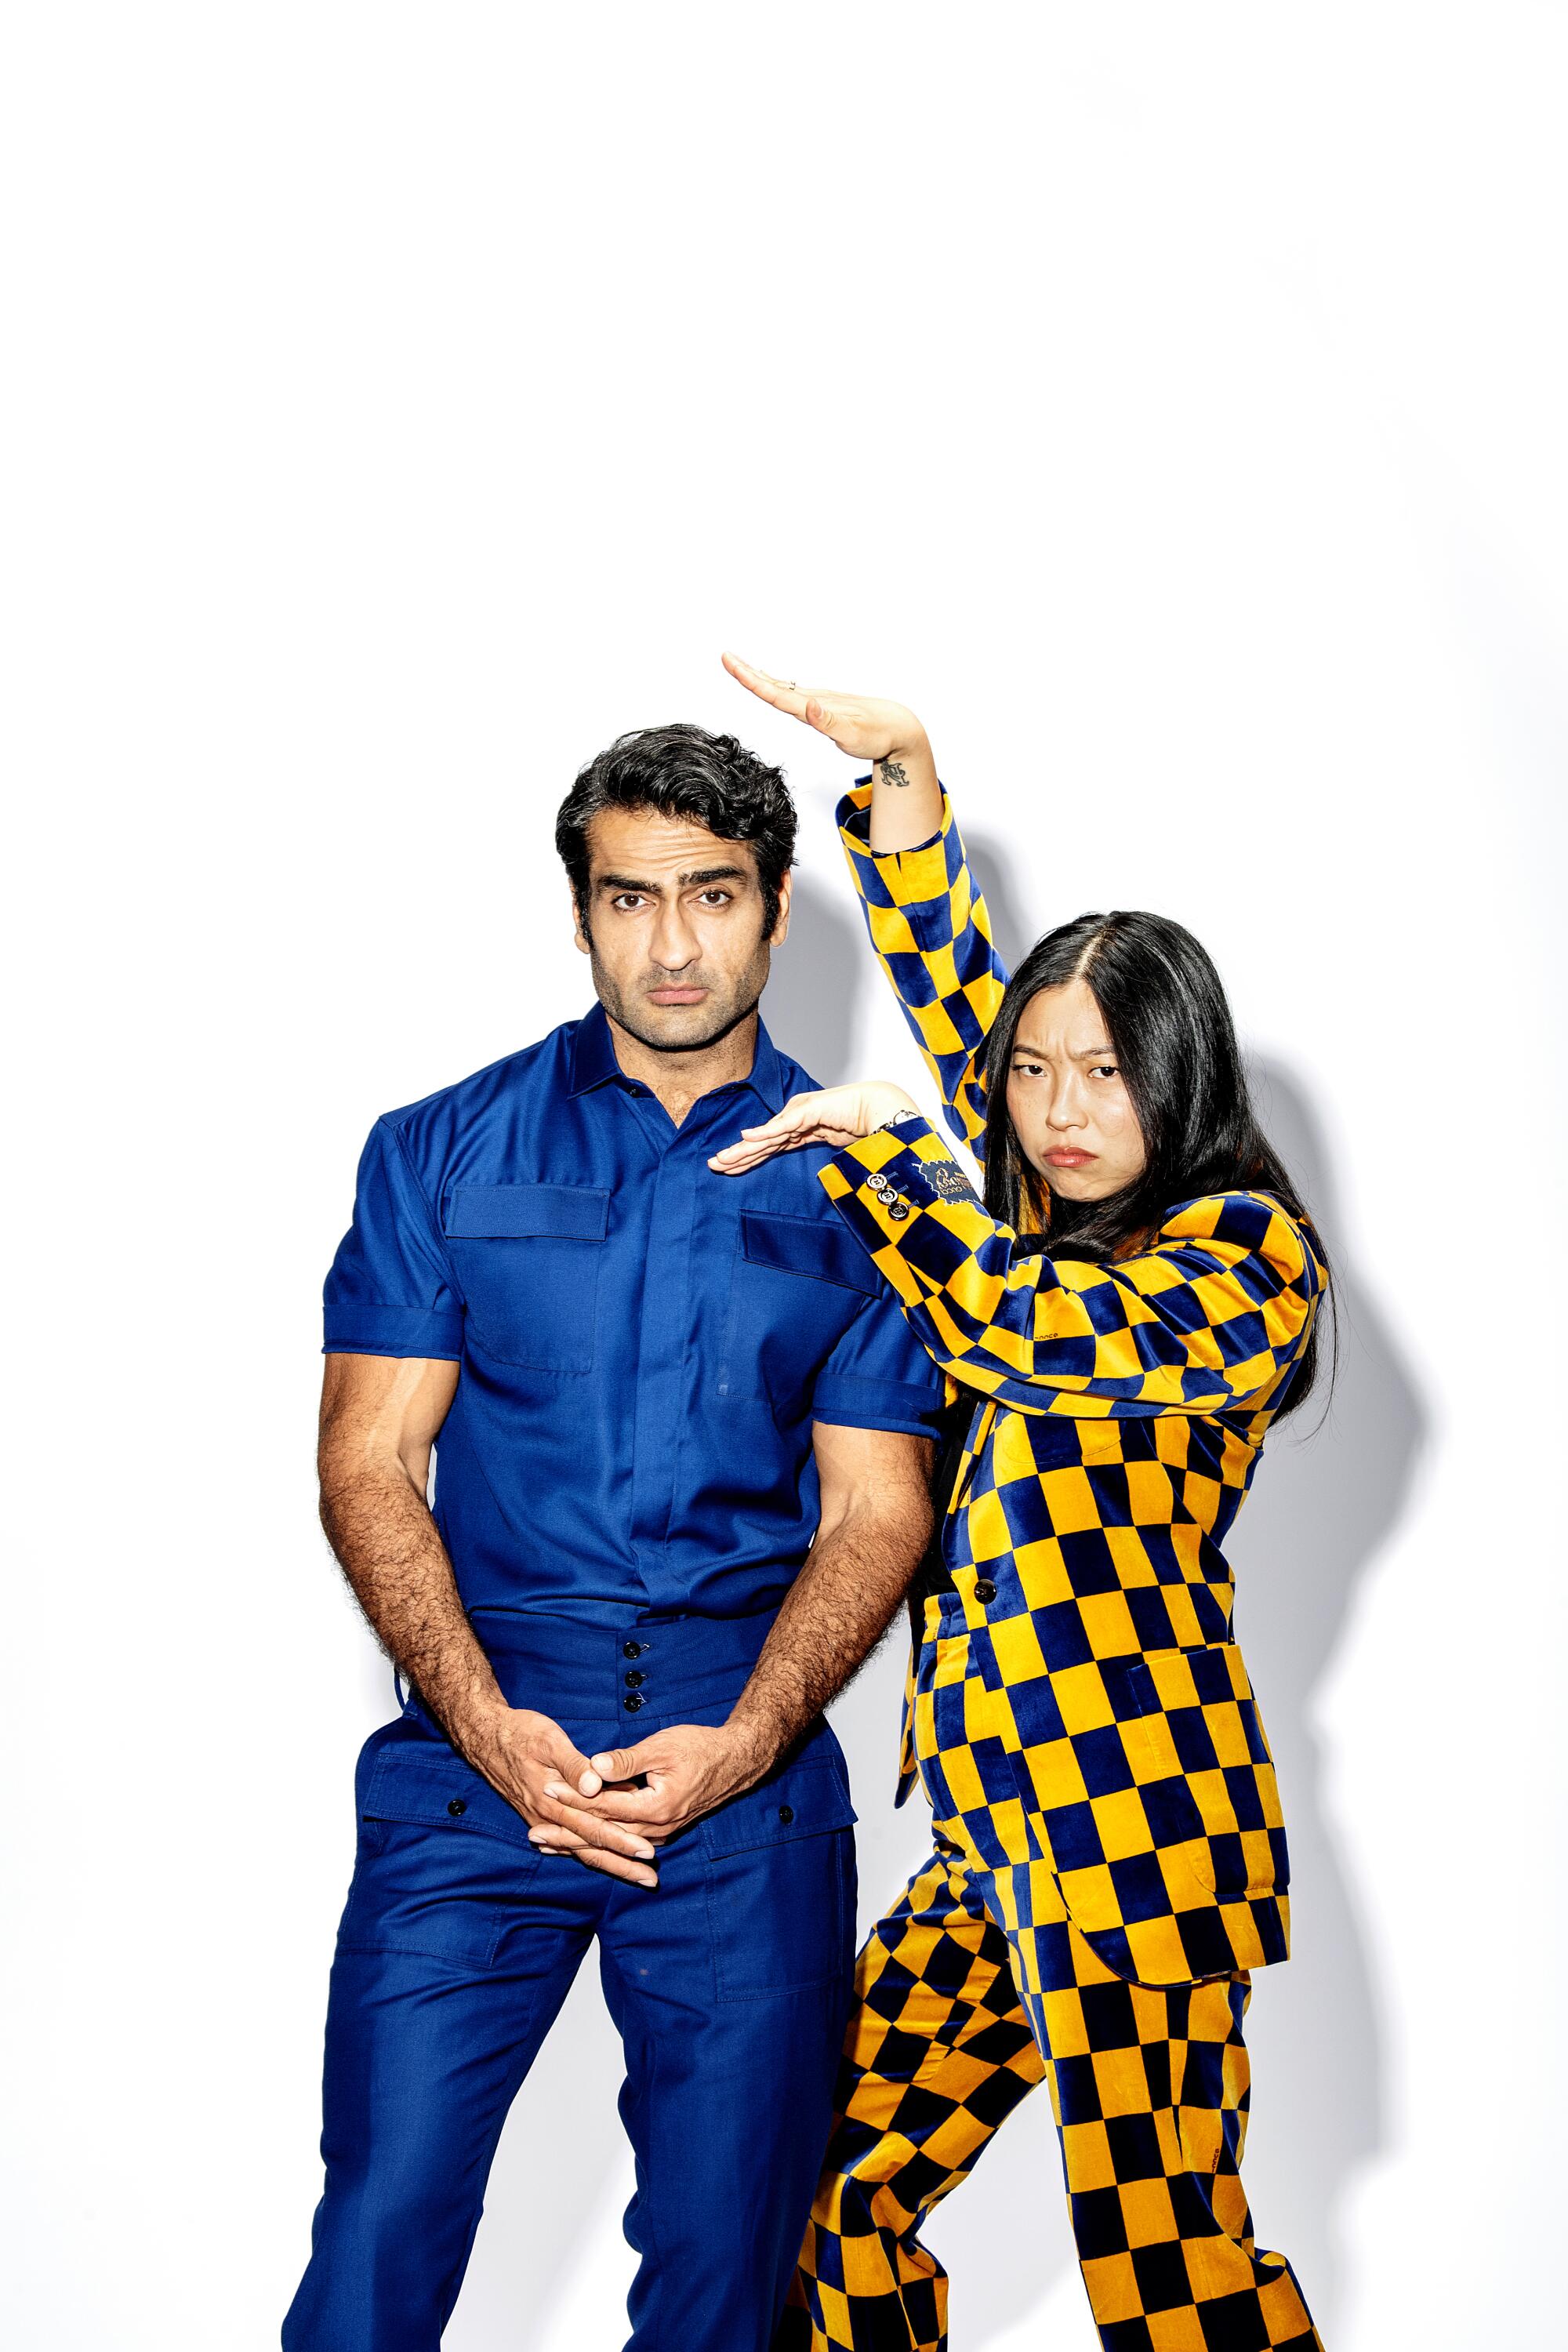 A man with dark hair in a blue outfit, left, stands next to a woman in a yellow-and-black checkered suit striking a pose 